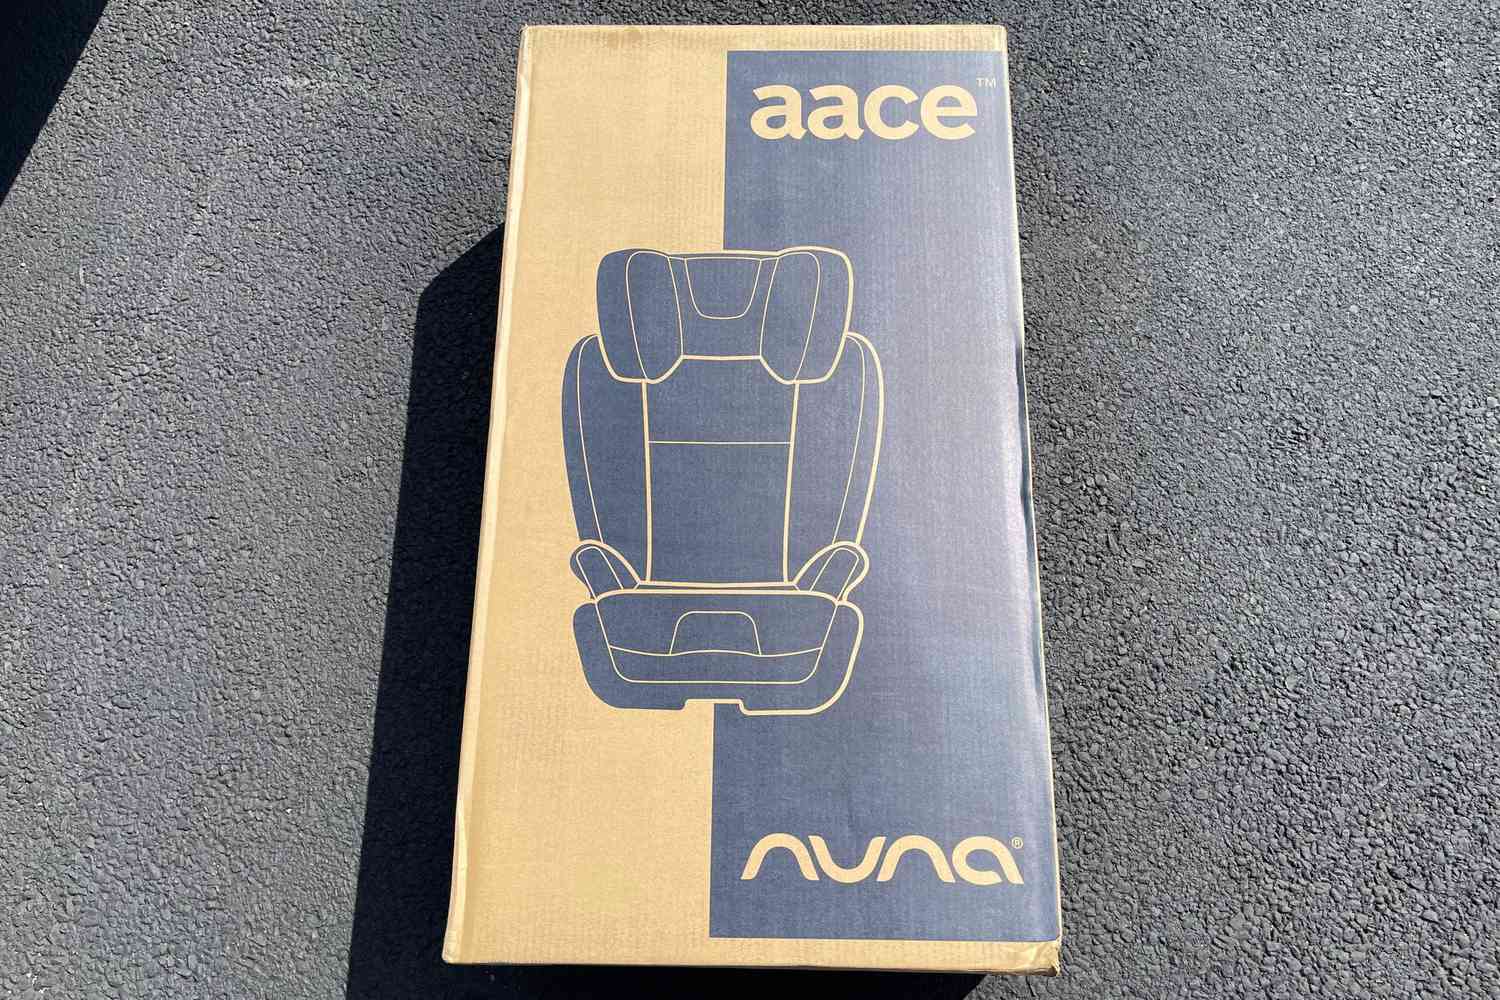 The Nuna AACE Booster Seat in the box